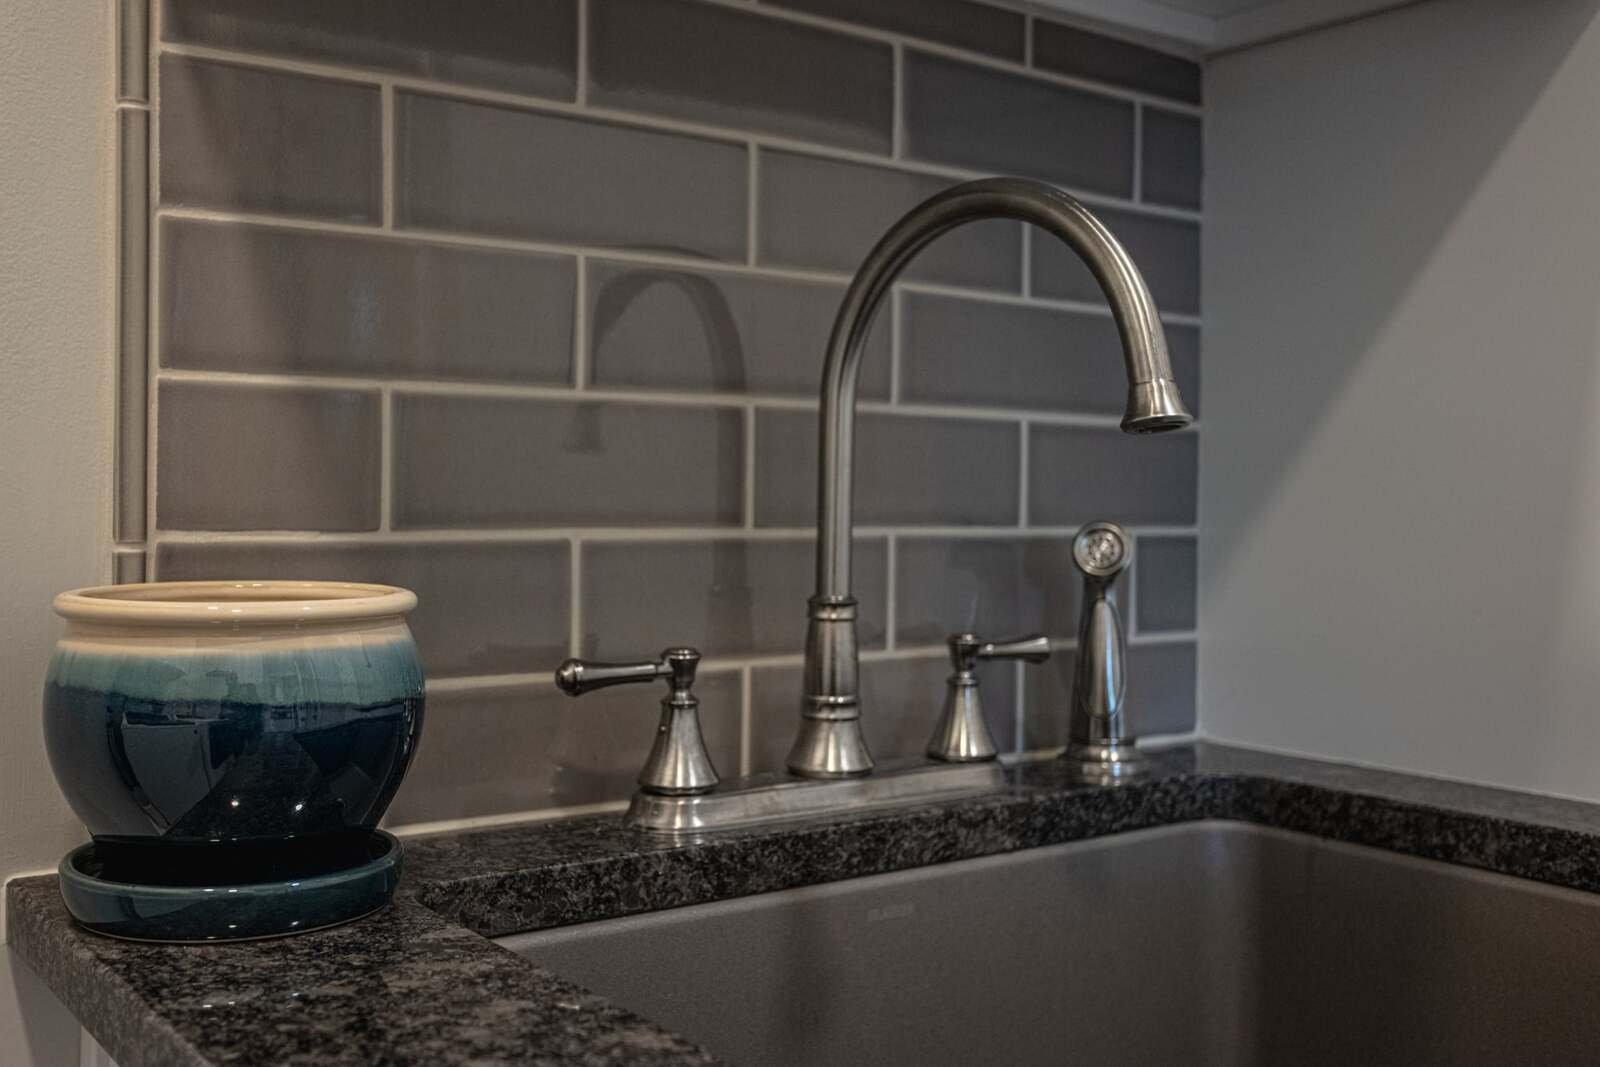 Stainless steel sink faucet with gray tile backsplash